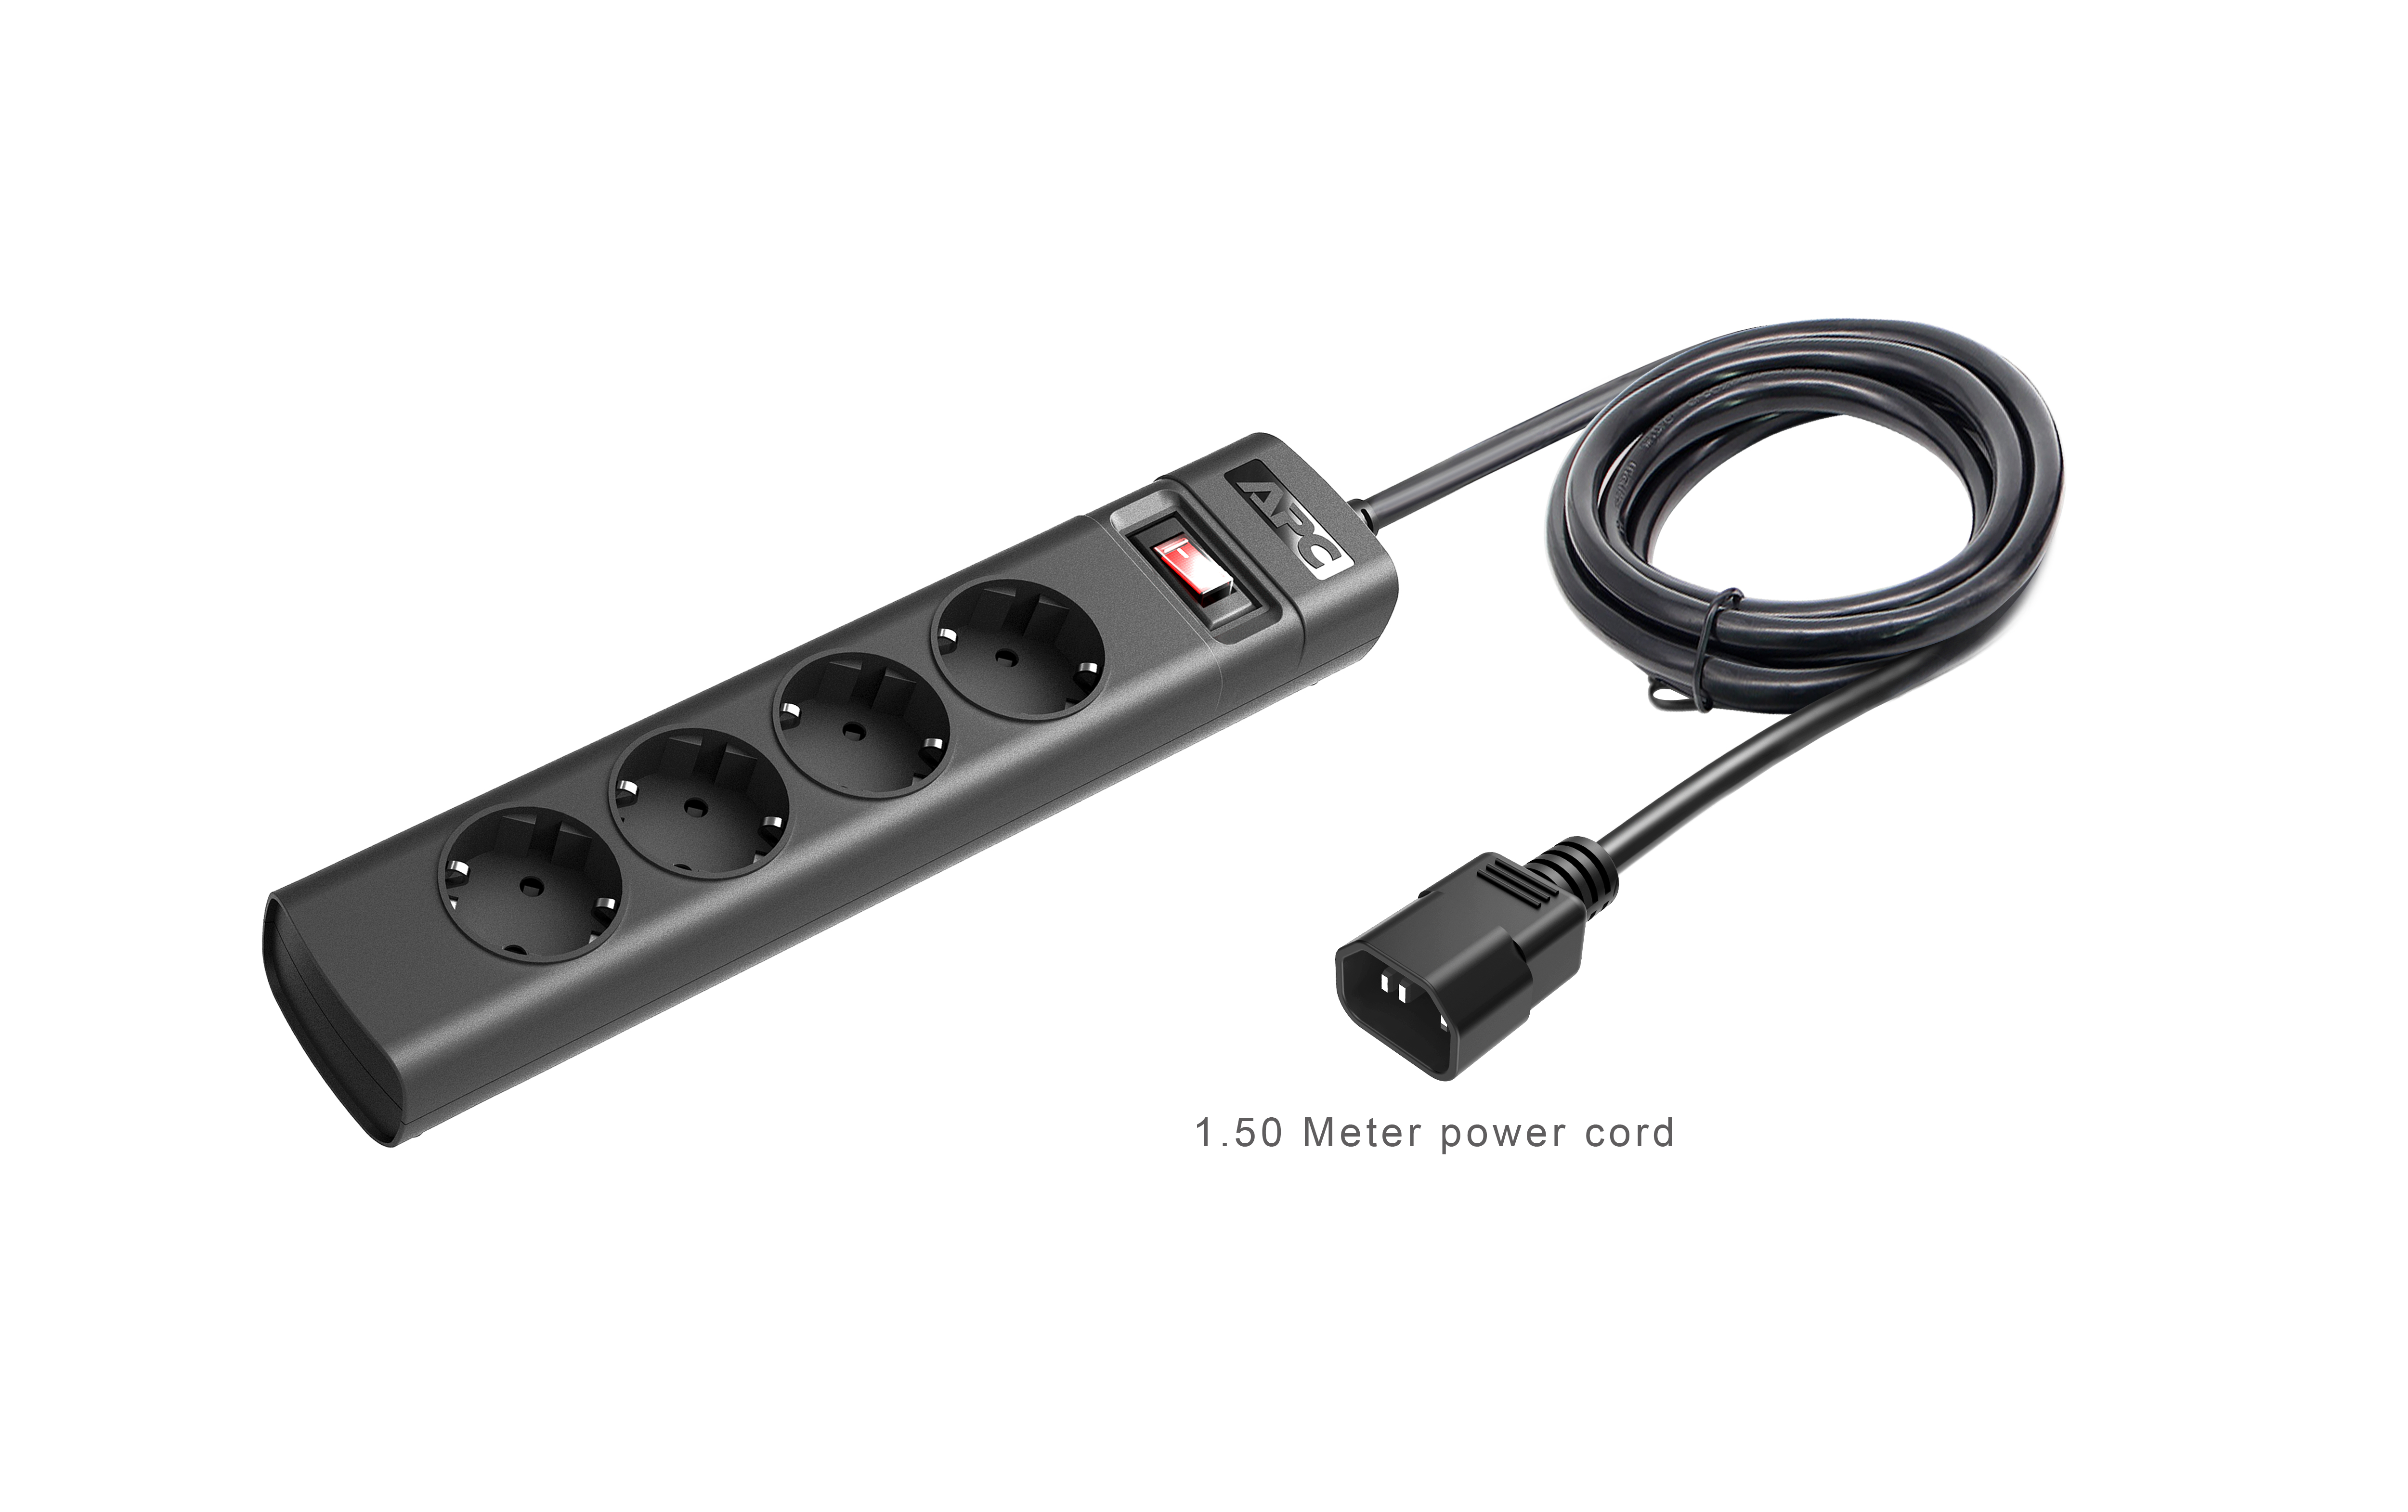  UPS Power Strip IEC C14 TO 4 Outlet